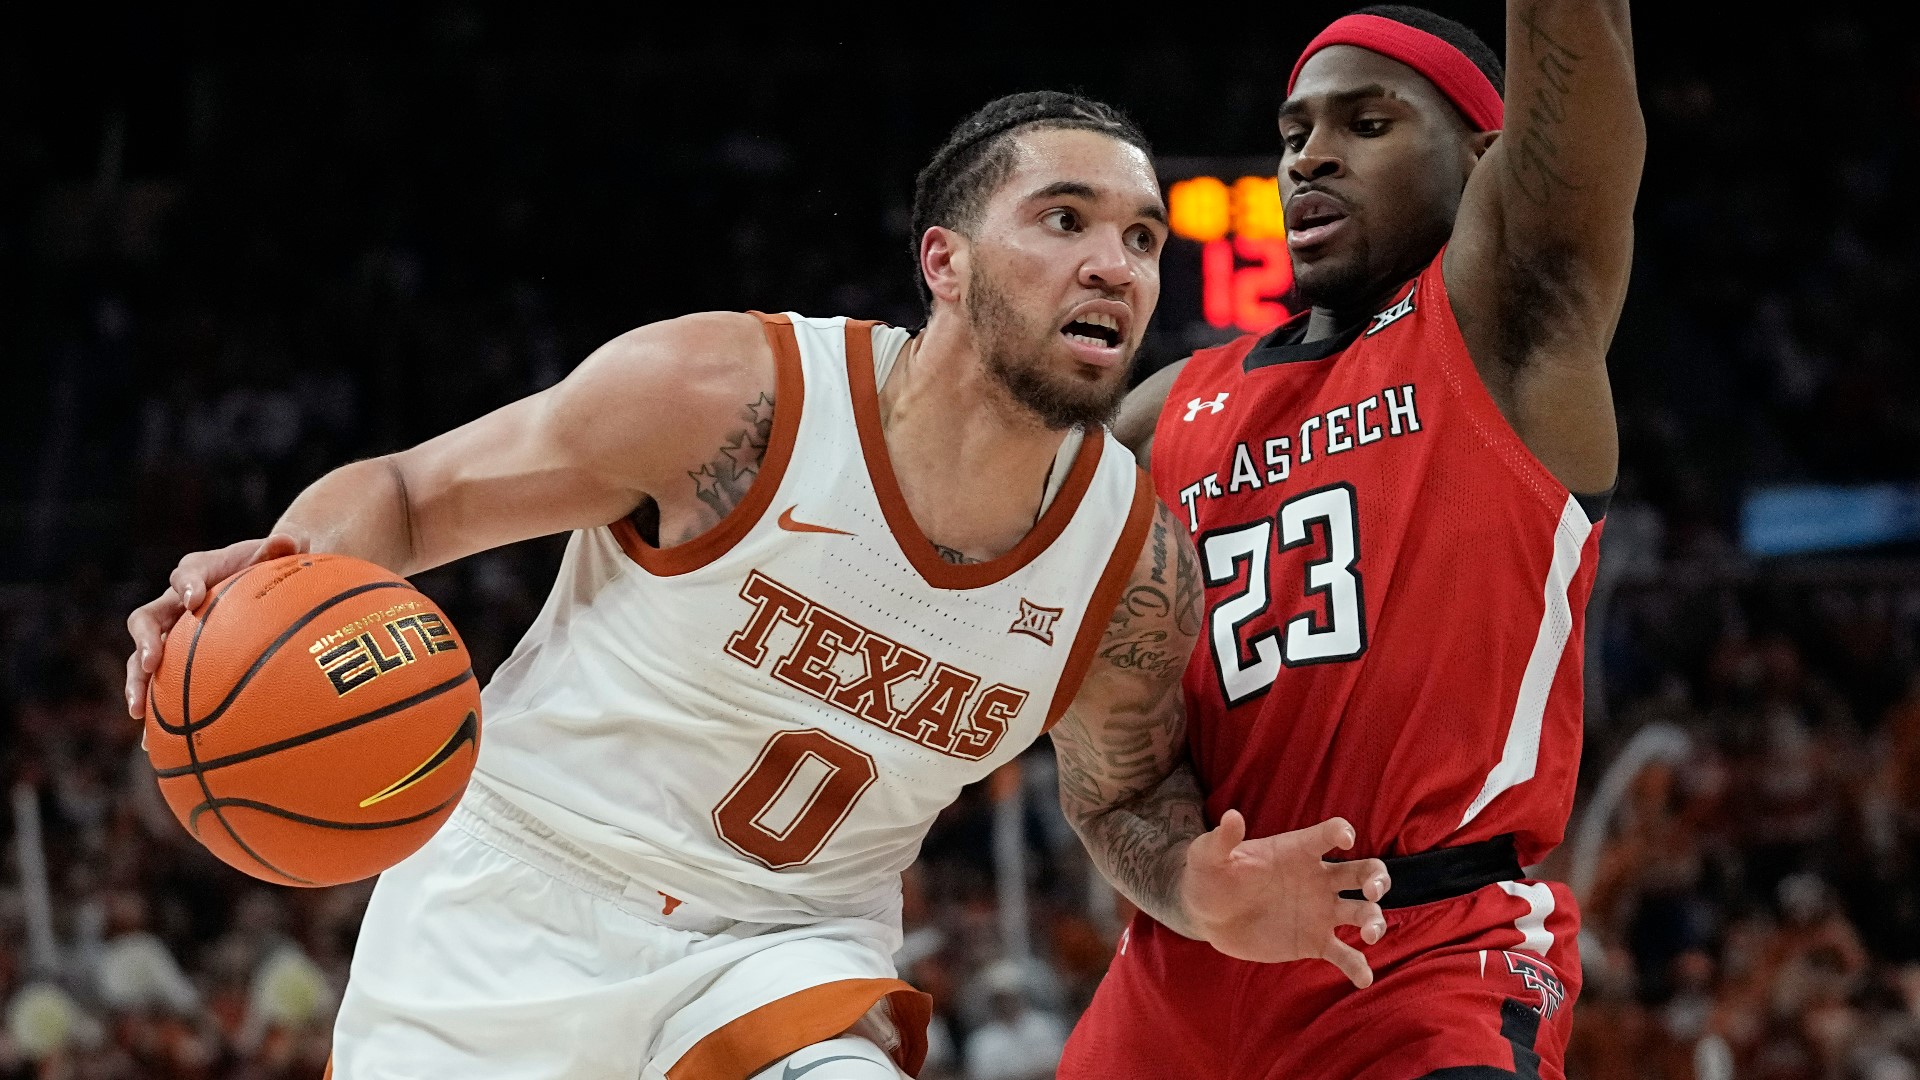 The Longhorns snapped the Red Raiders' four-game streak on Saturday.